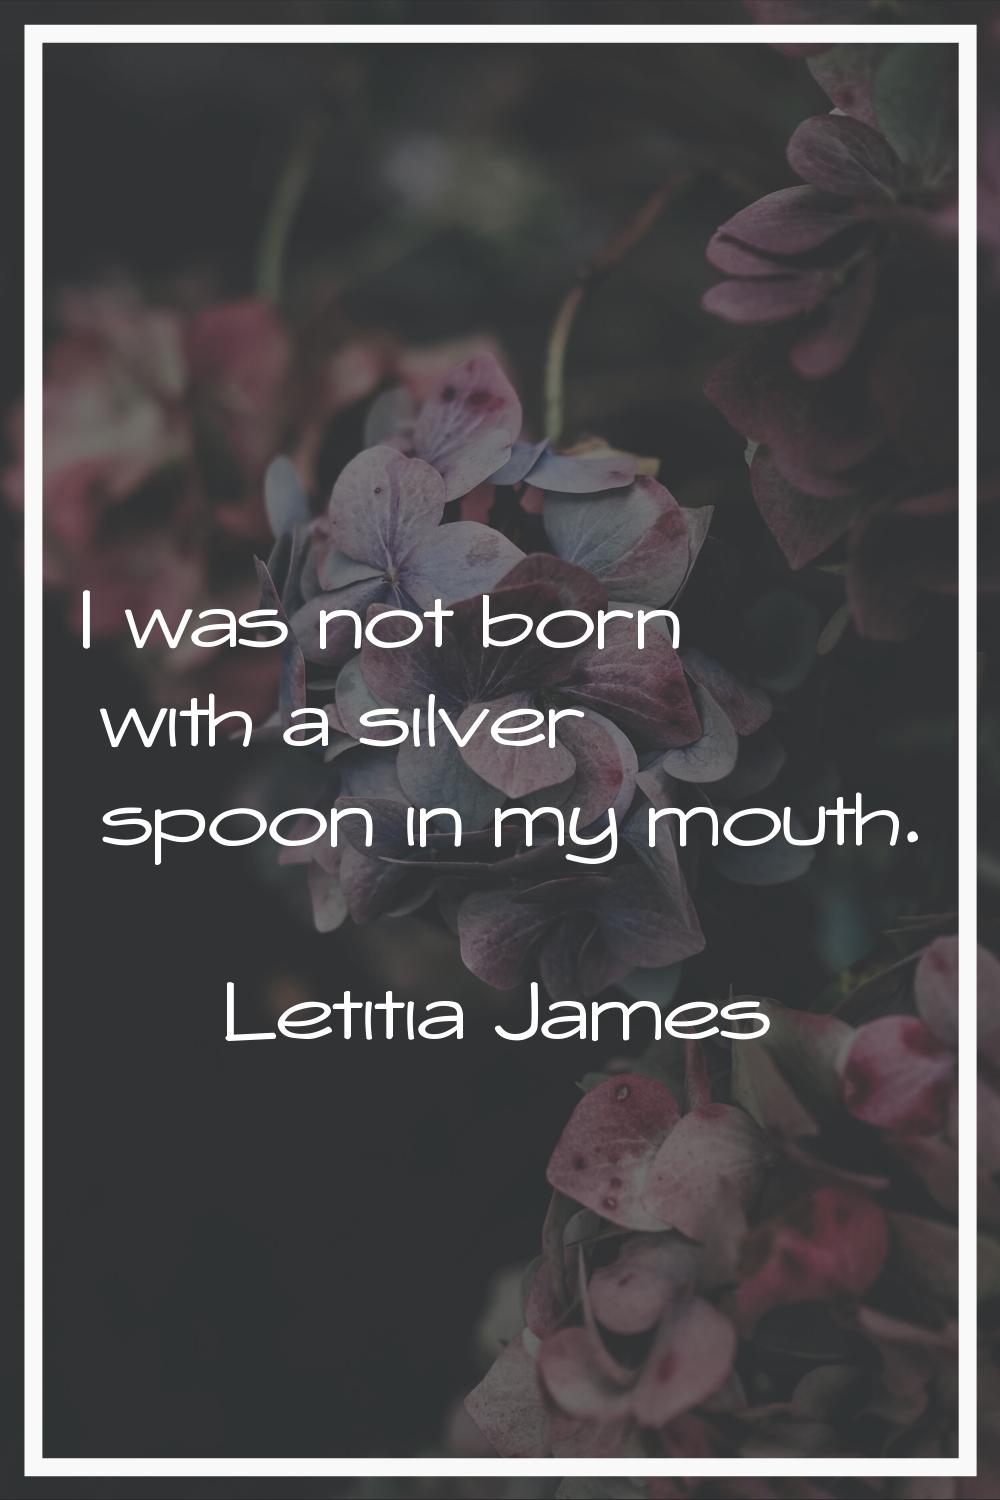 I was not born with a silver spoon in my mouth.